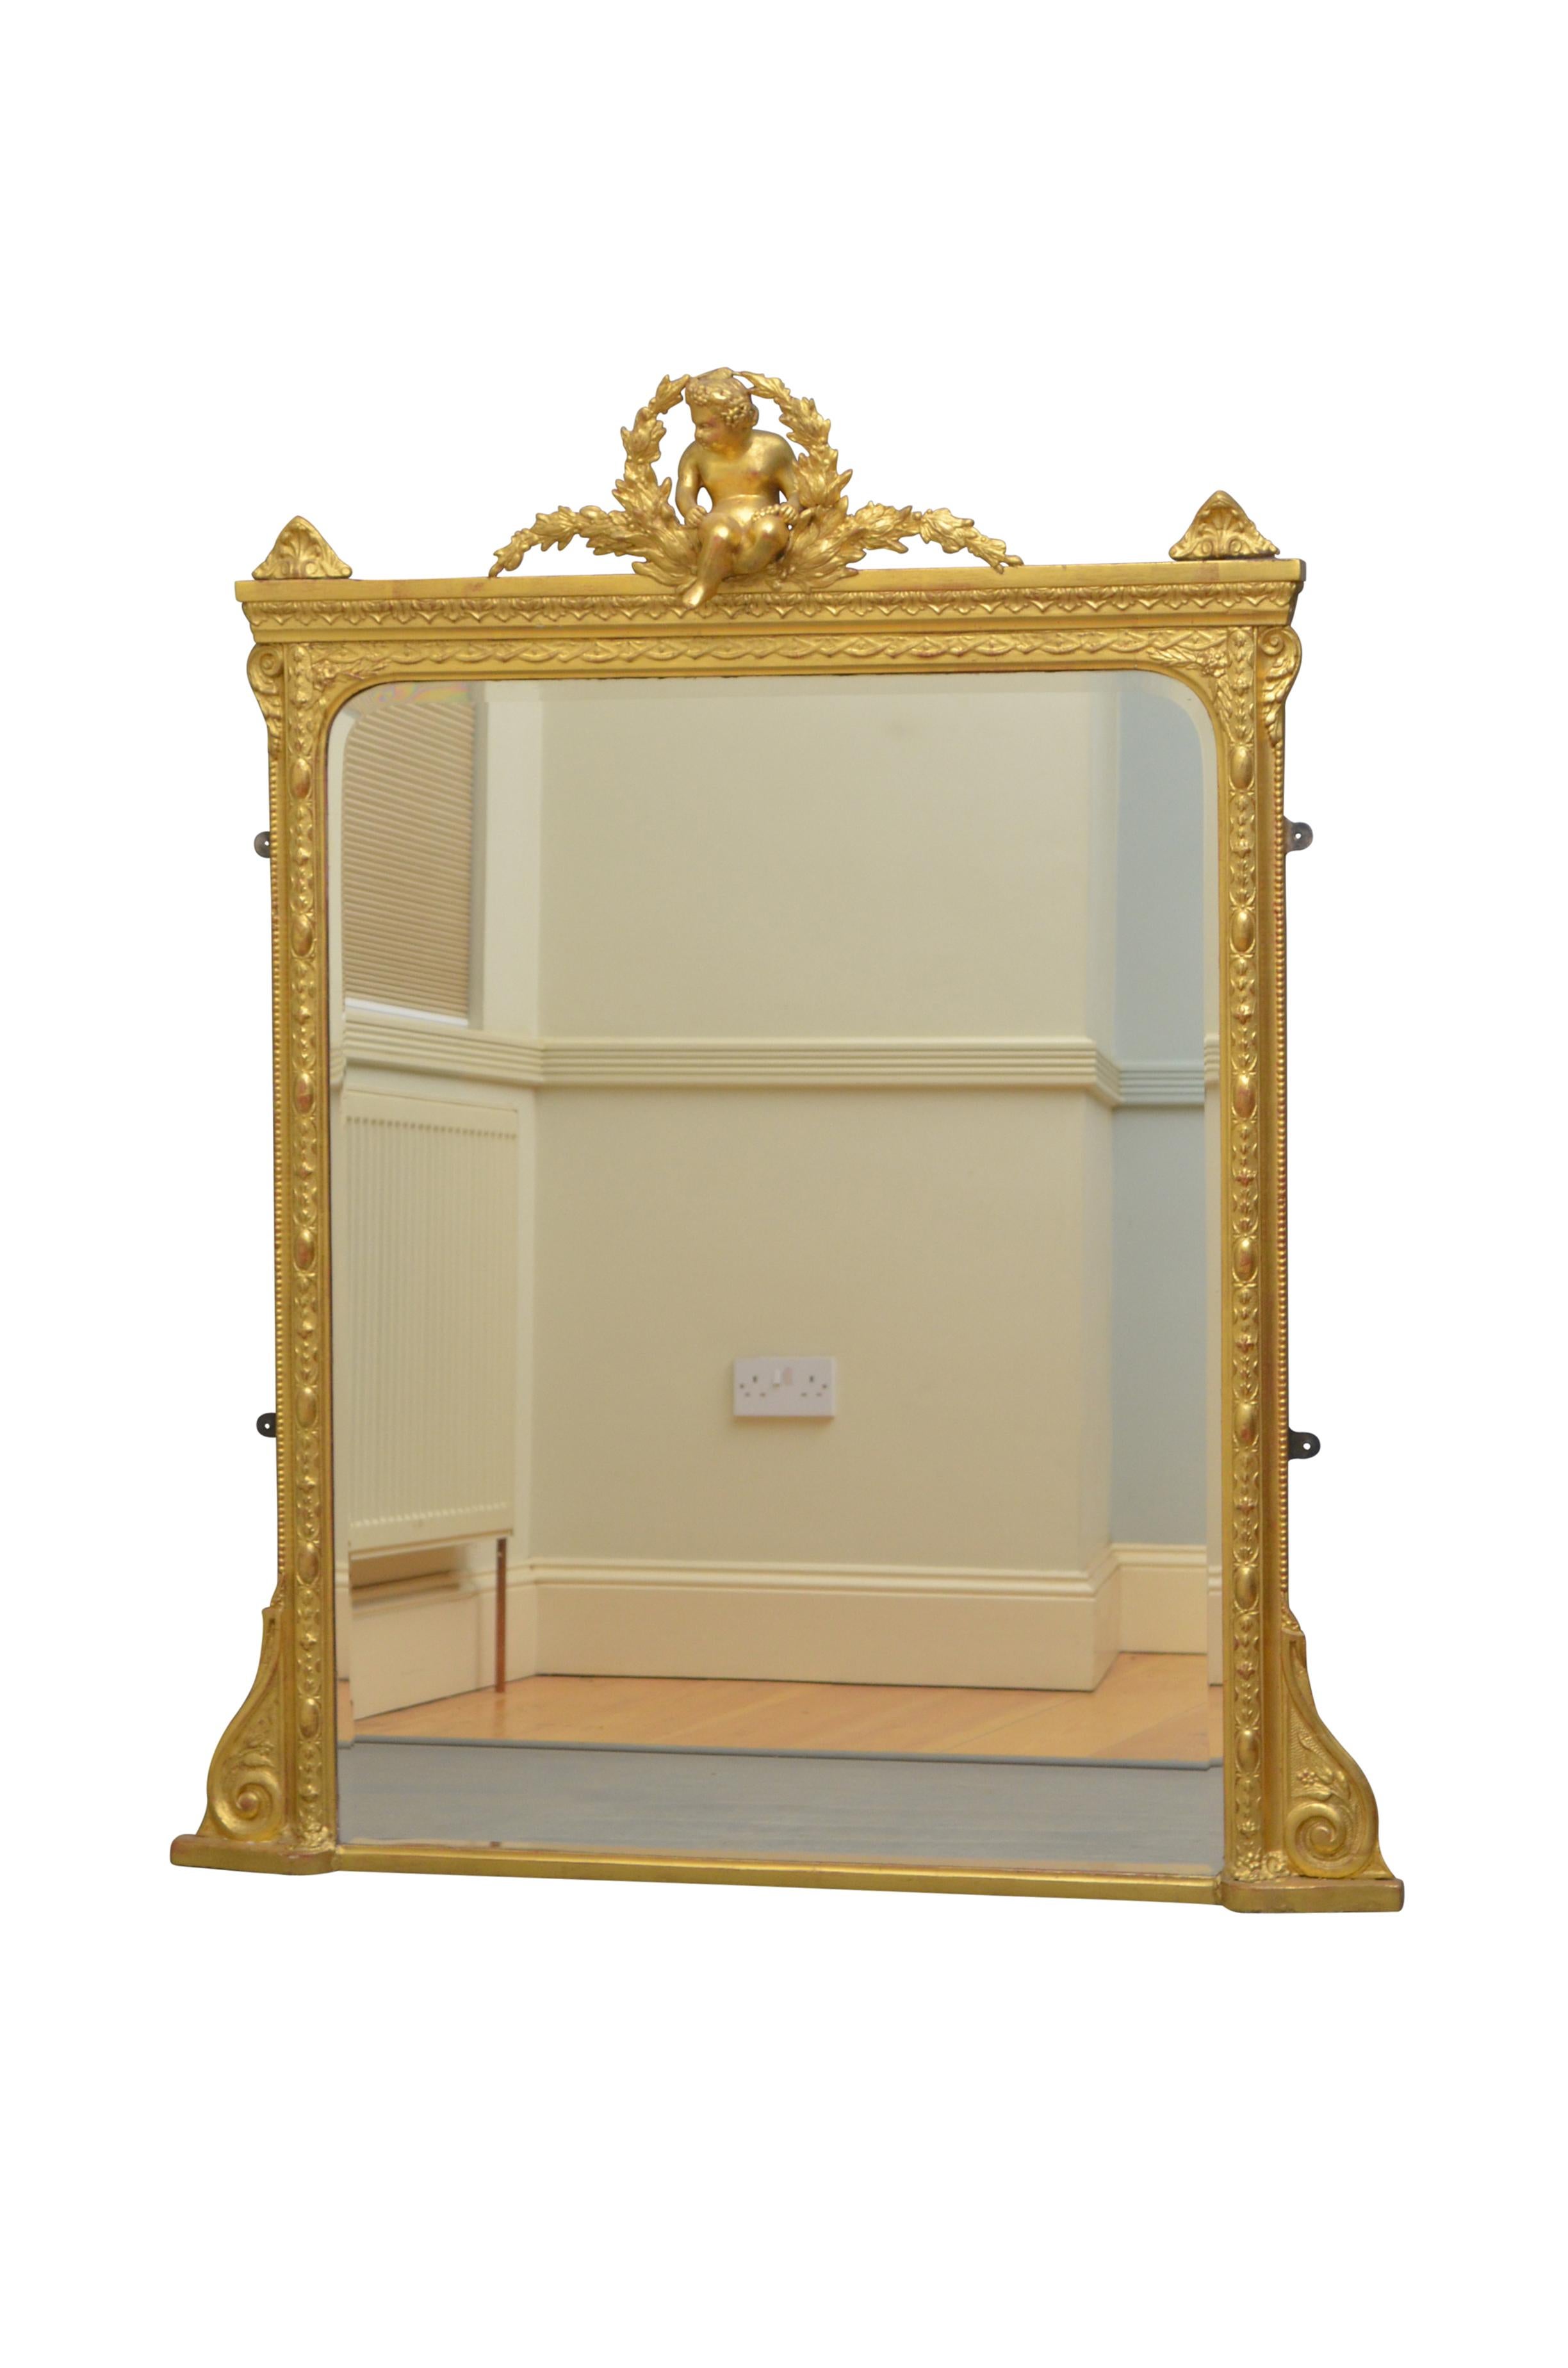 K0403 Victorian revival giltwood overmntle wall mirror with original bevelled edge glass (with small air bubbles throughout) in carved frames with cherub to centre and fine scrolls to base. This mirror retains its original glass and gilt, all in